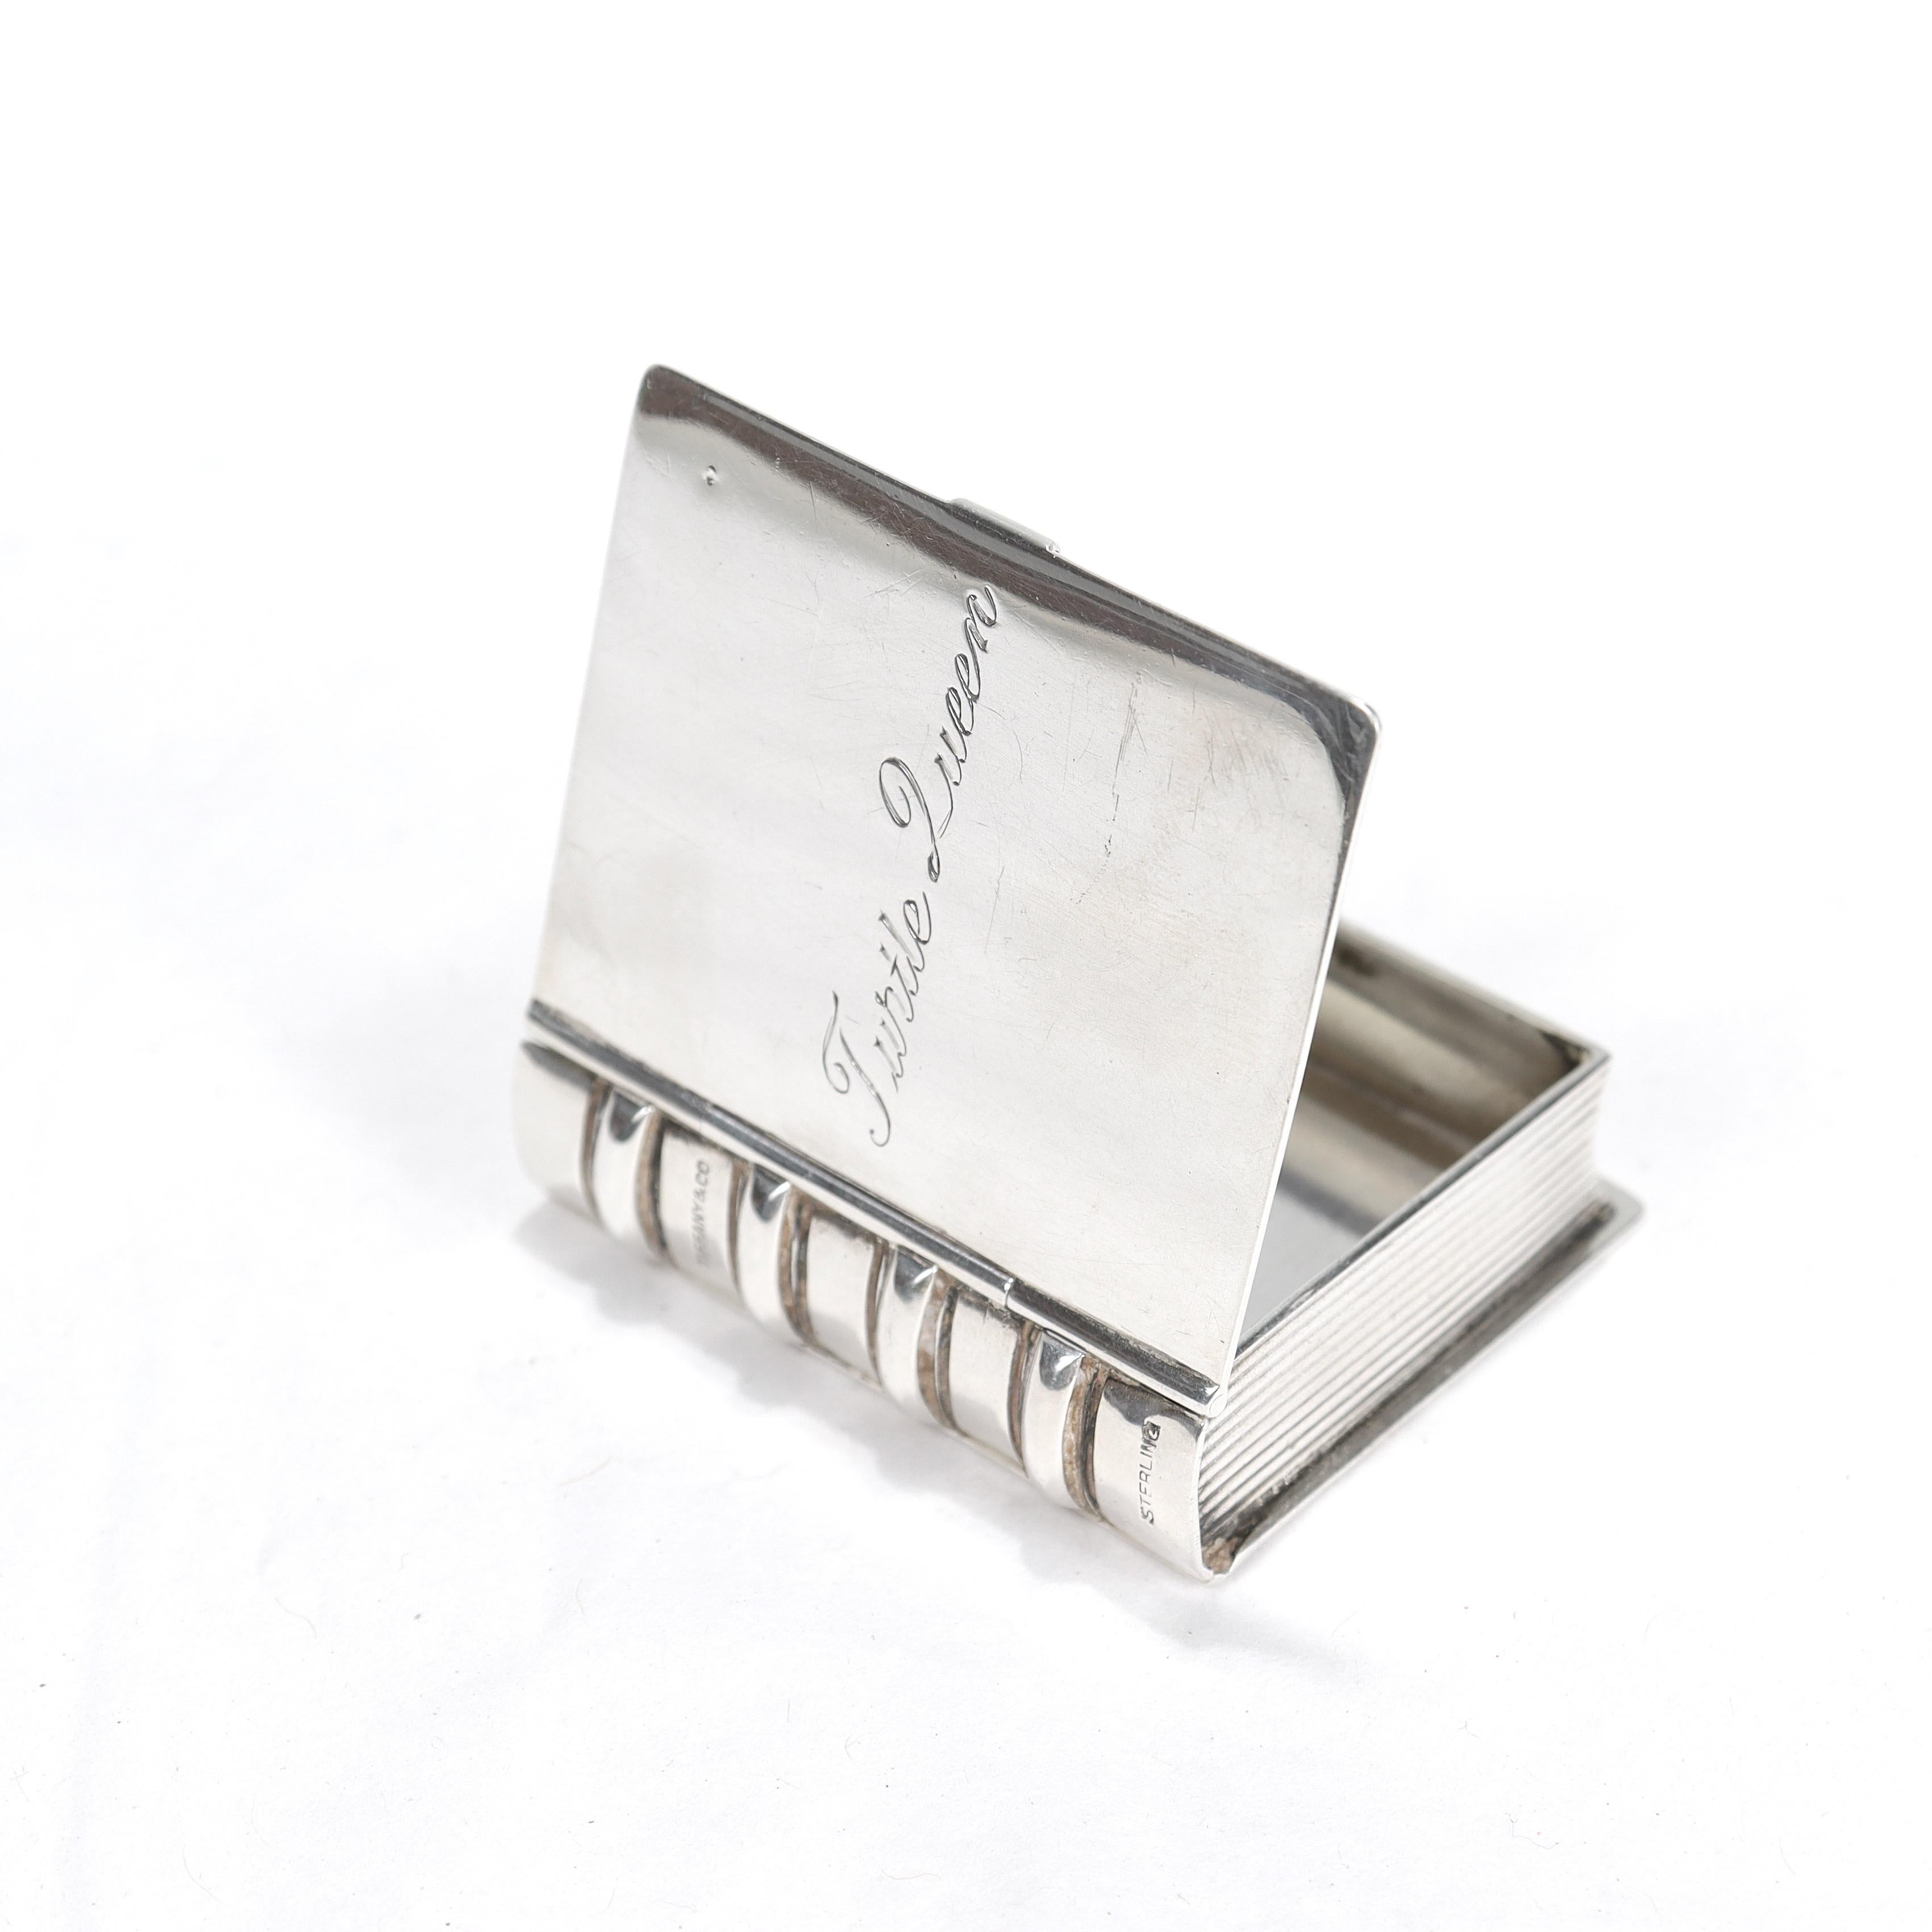 A fine vintage sterling silver pill box.

By Tiffany & Co.

In sterling silver.

In the form of a book.

Engraved with a whimsical 